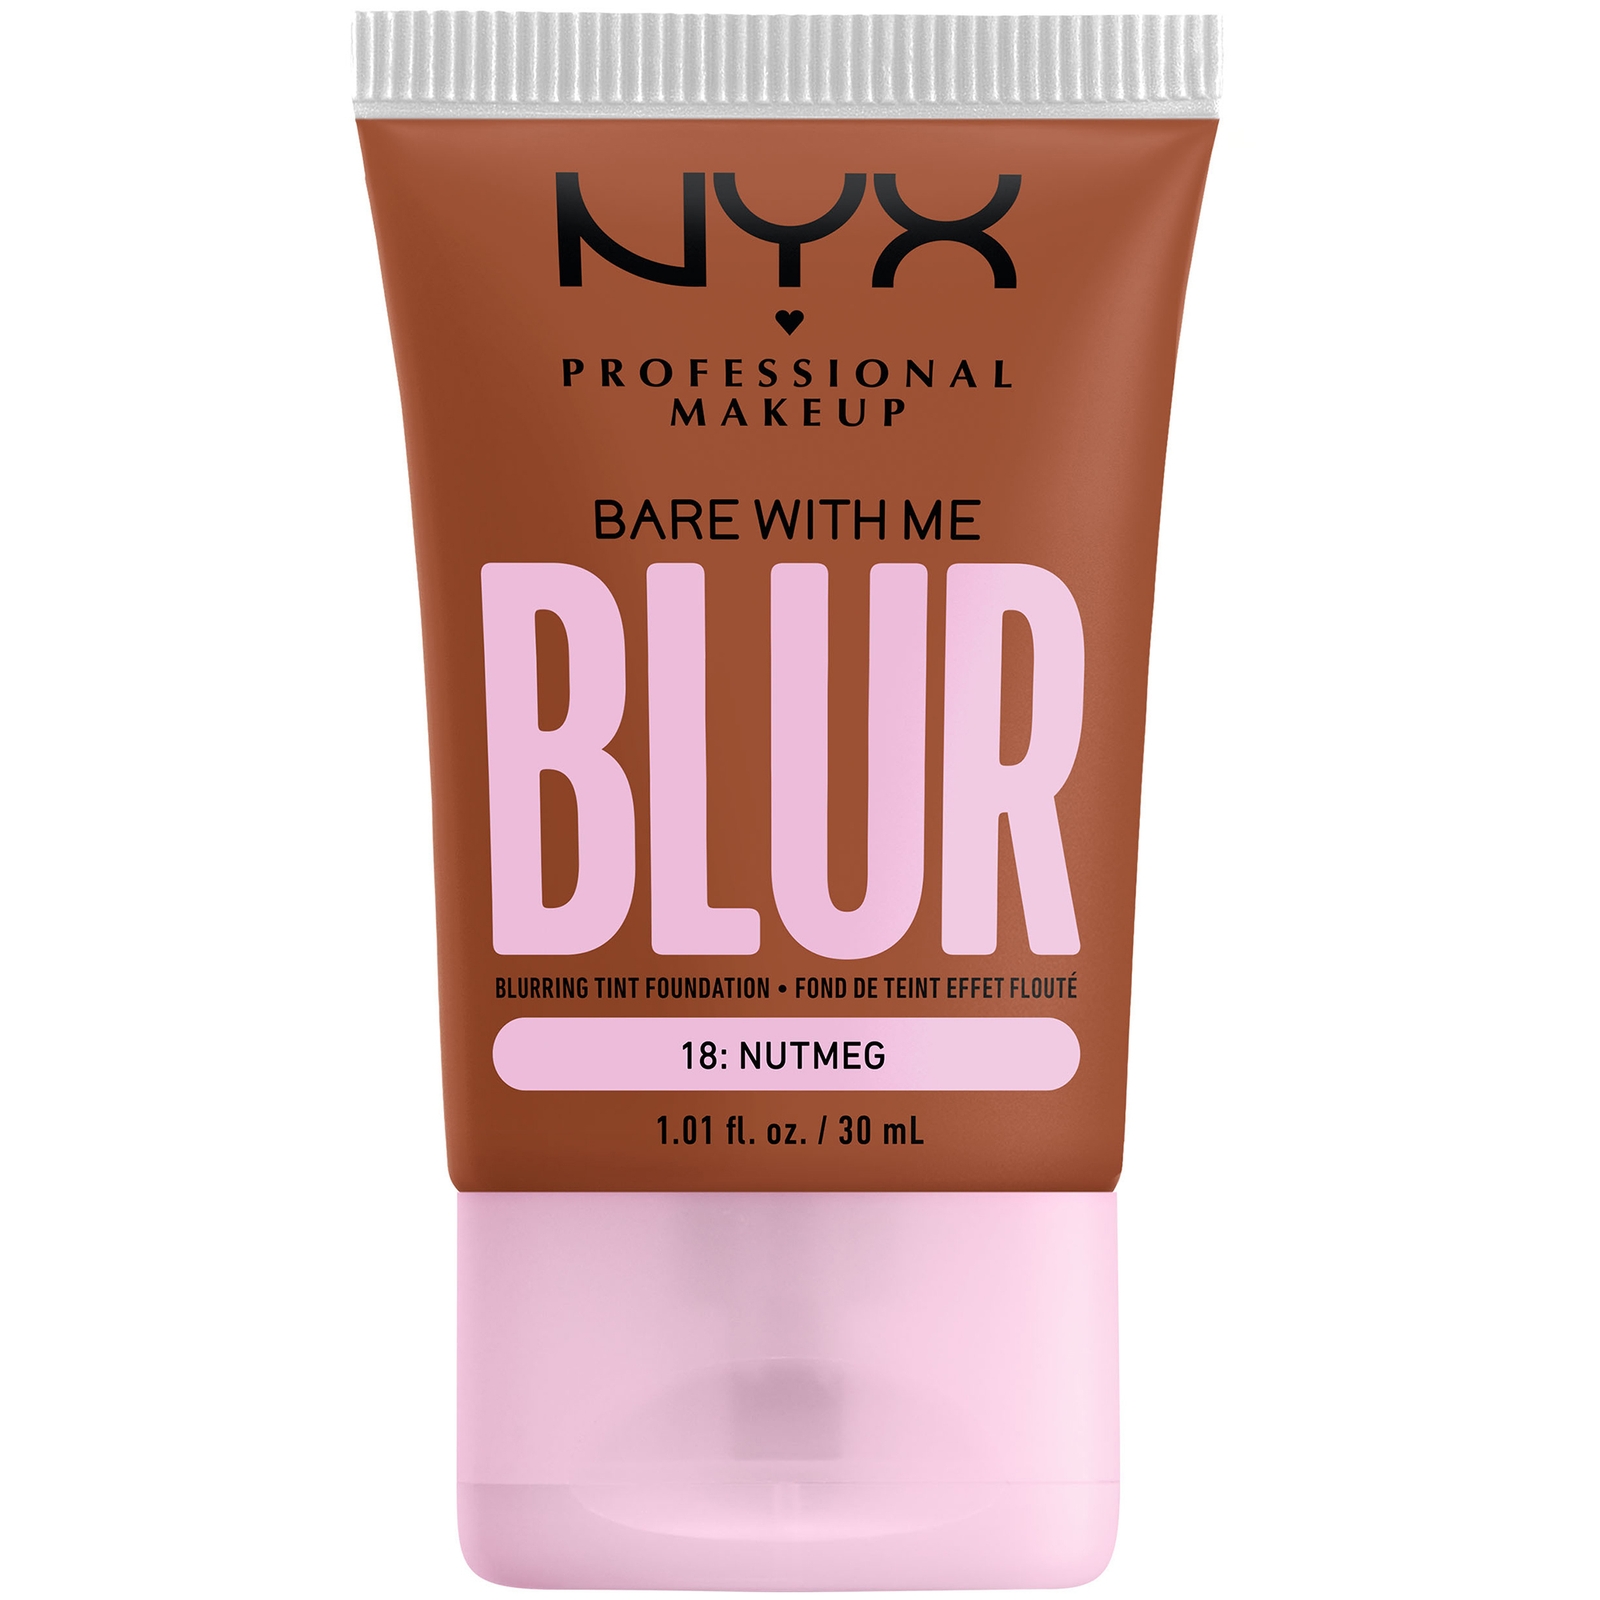 Nyx Professional Makeup Bare With Me Blur Tint Foundation 30ml (varios Shades) - Nutmeg In White